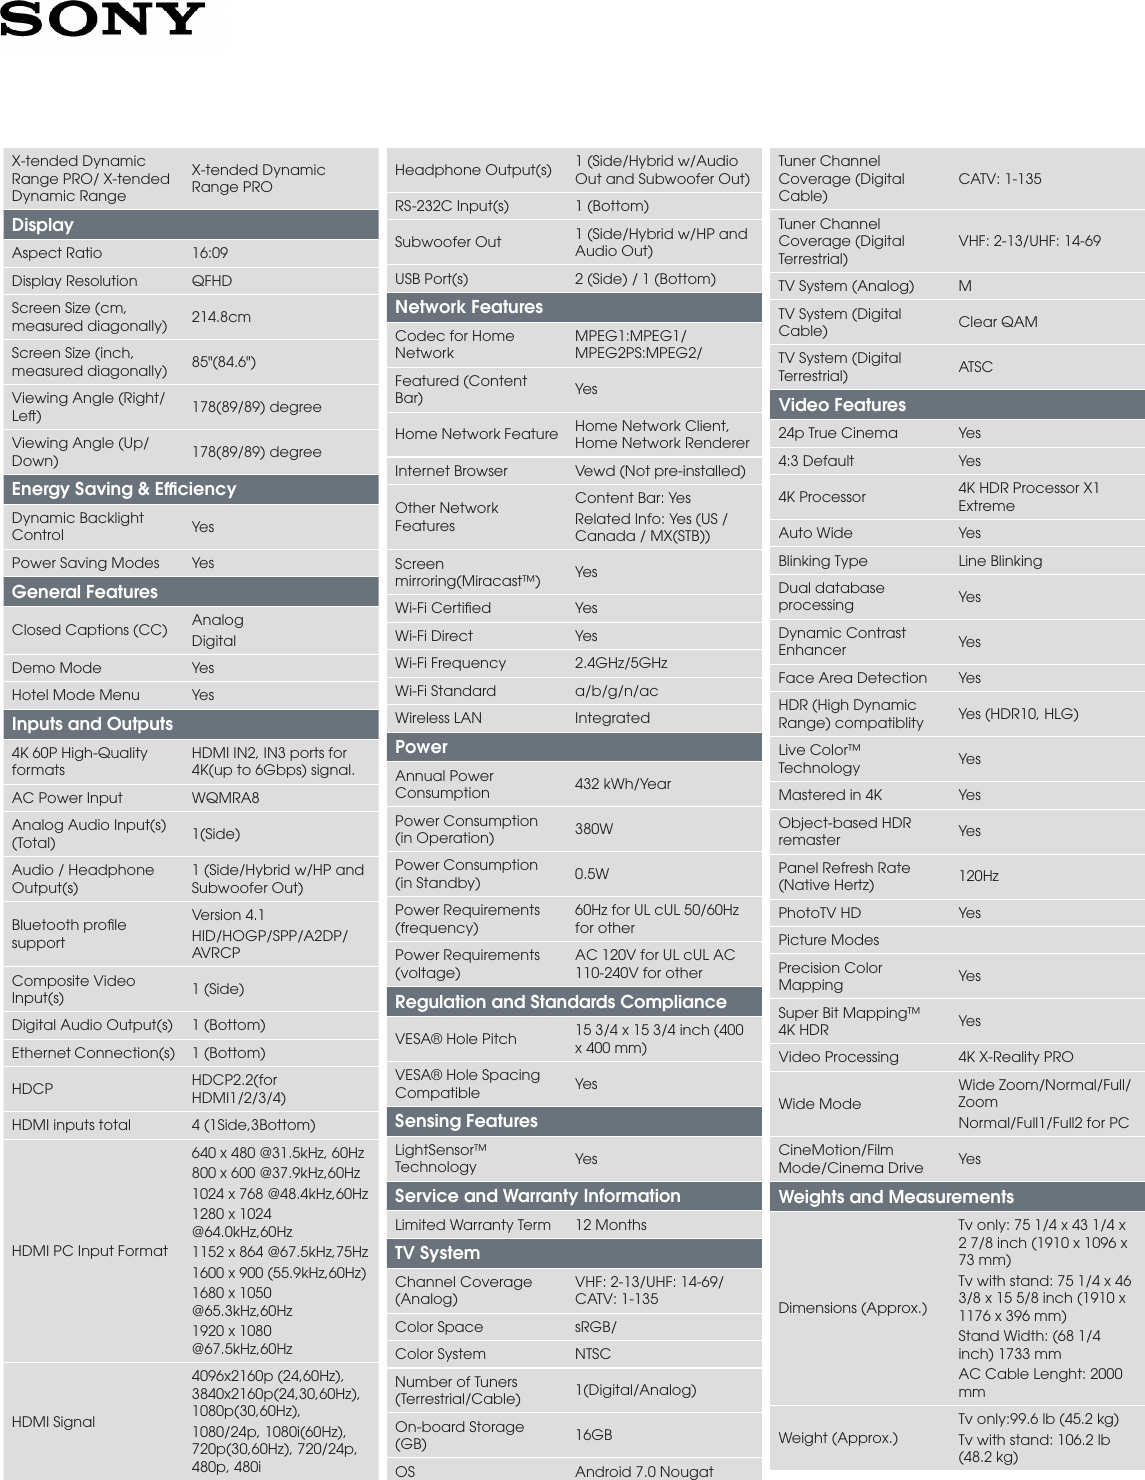 Page 3 of 4 - Sony XBR-85X900F User Manual Marketing Specifications Docget